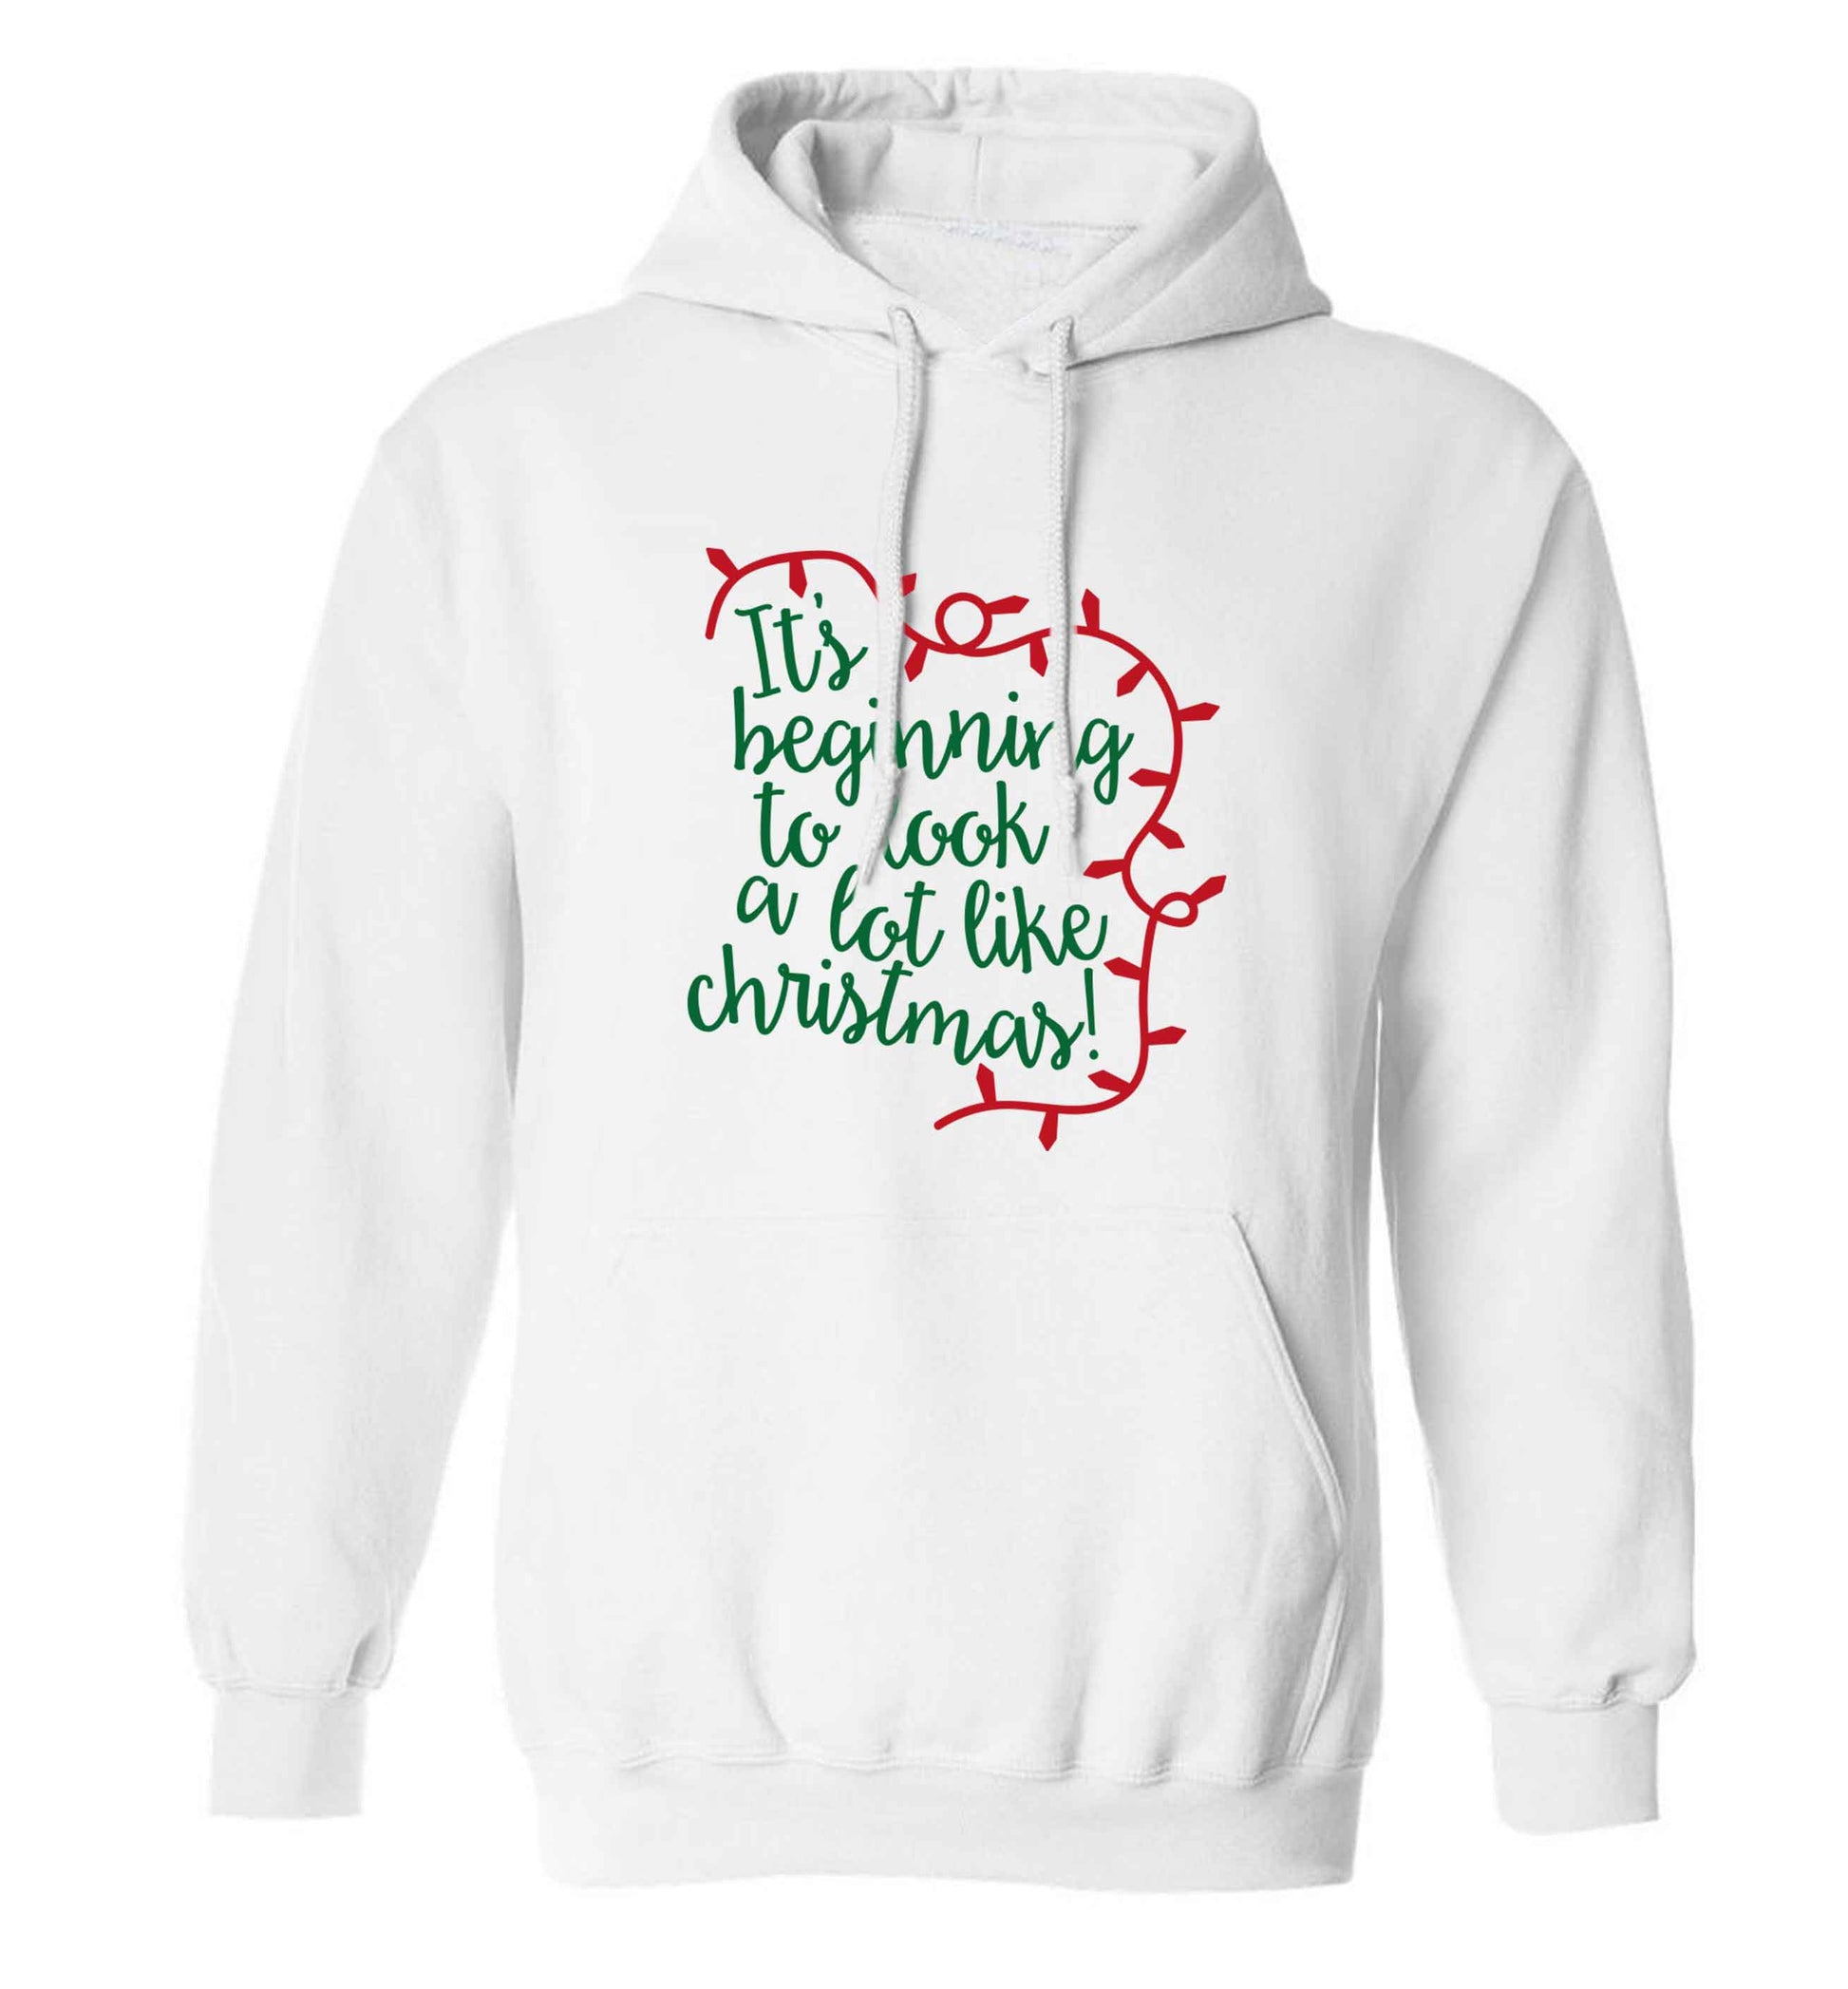 It's beginning to look a lot like Christmas adults unisex white hoodie 2XL